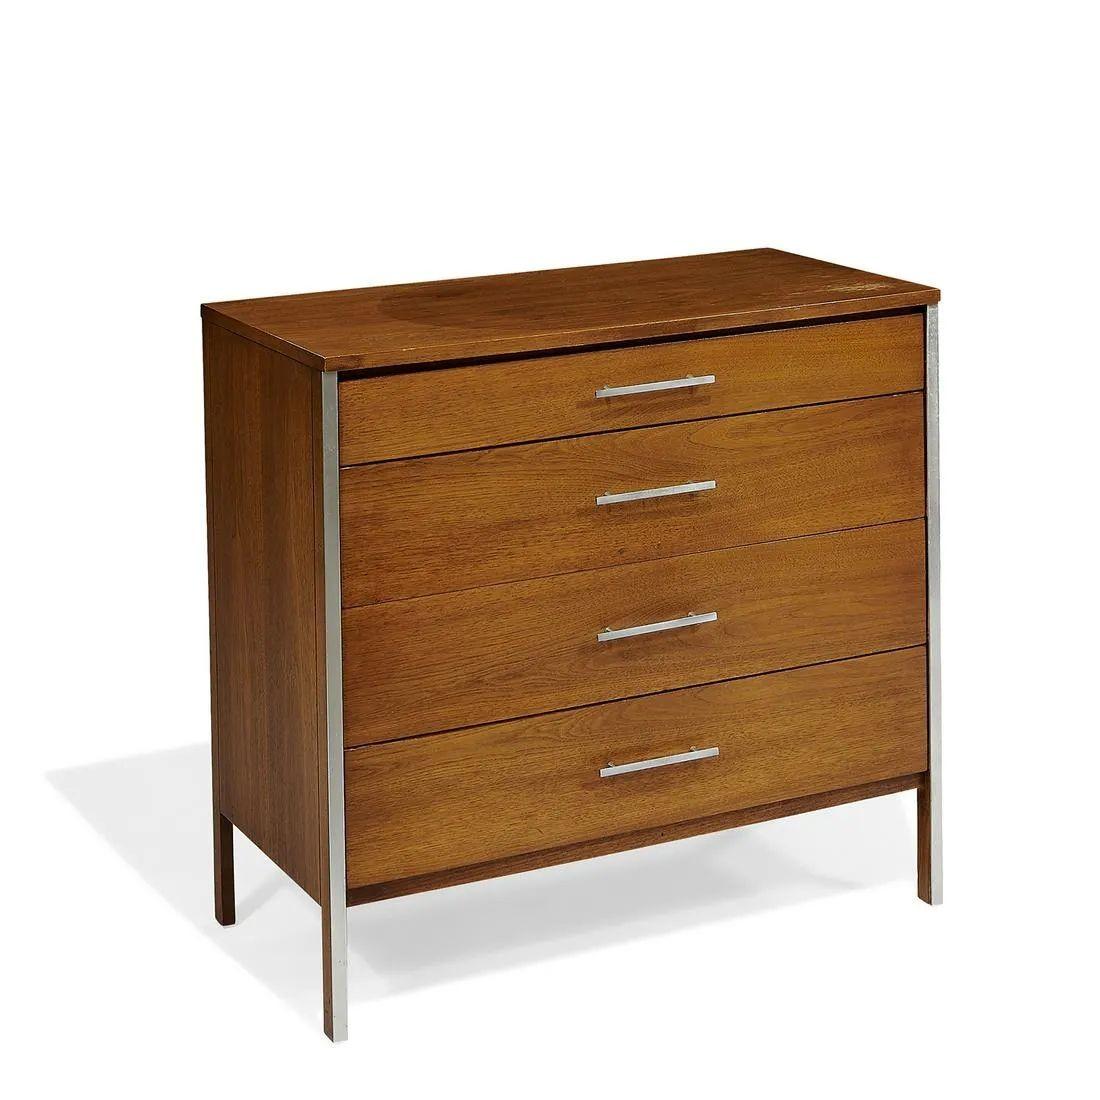 Mid-Century Modern Chest by Paul McCobb (1917-1969) for Calvin Linear Group 
 
 
This walnut and aluminum chest having four center drawers with pulls. Grand Rapids, Michigan, 1950s
aluminum tag 'CALVIN' to interior of one drawer.

 
Other